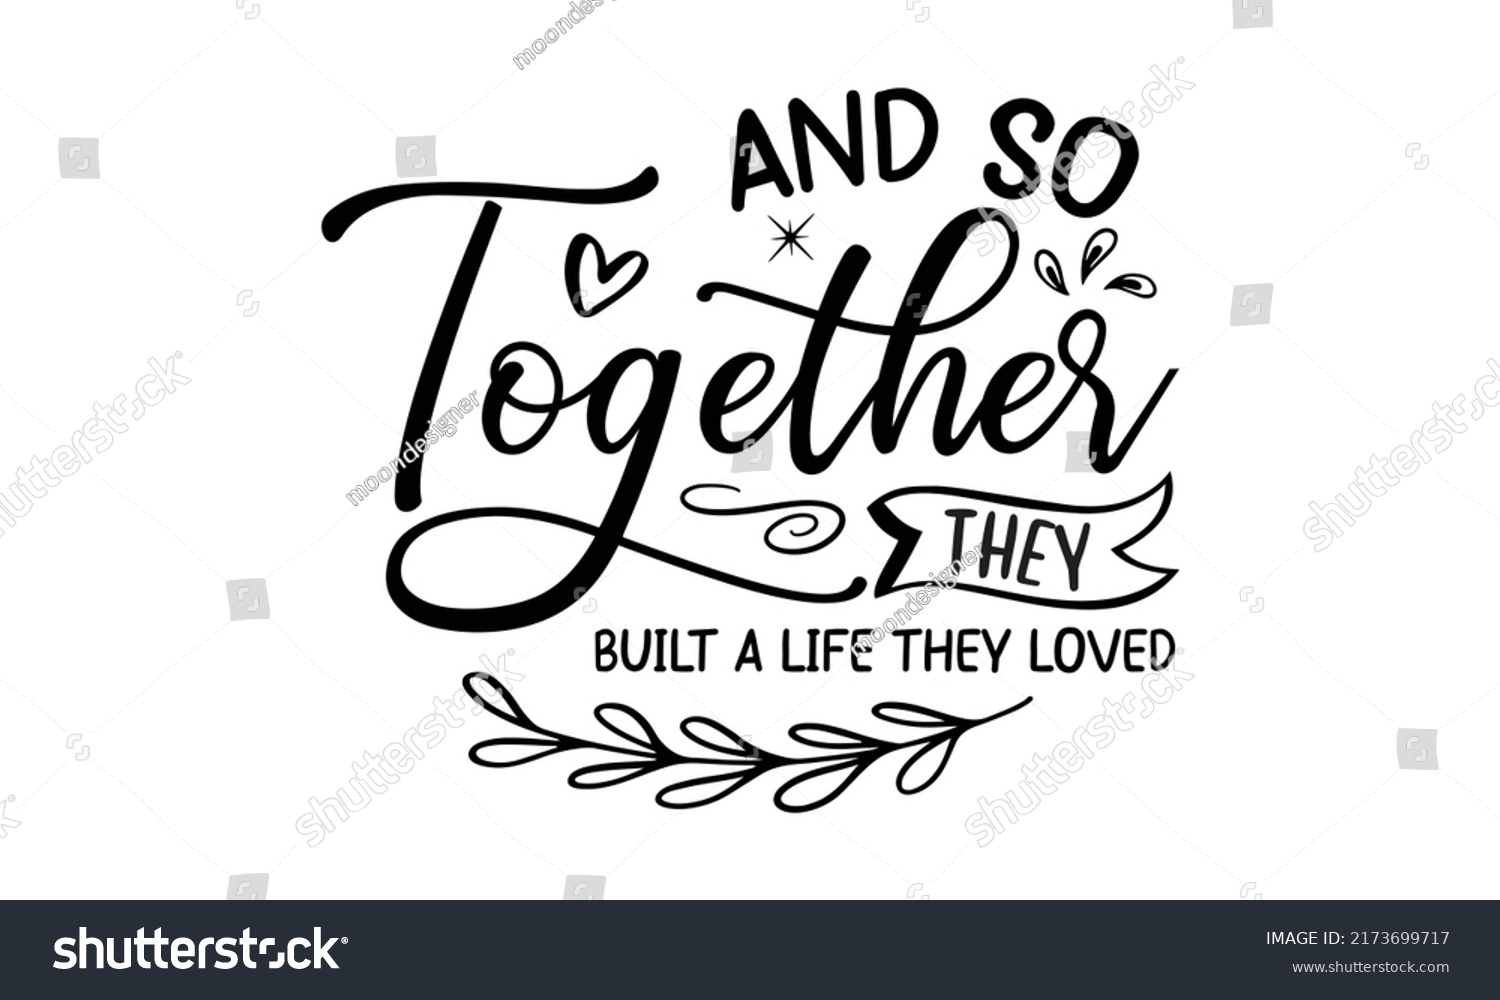 SVG of And so together they built a life they loved- family t shirt design, svg, Family Quotes SVG Cut Files Designs, Family quotes SVG cut files, Family quotes t shirt designs, Doormat Lettering Quotes For  svg